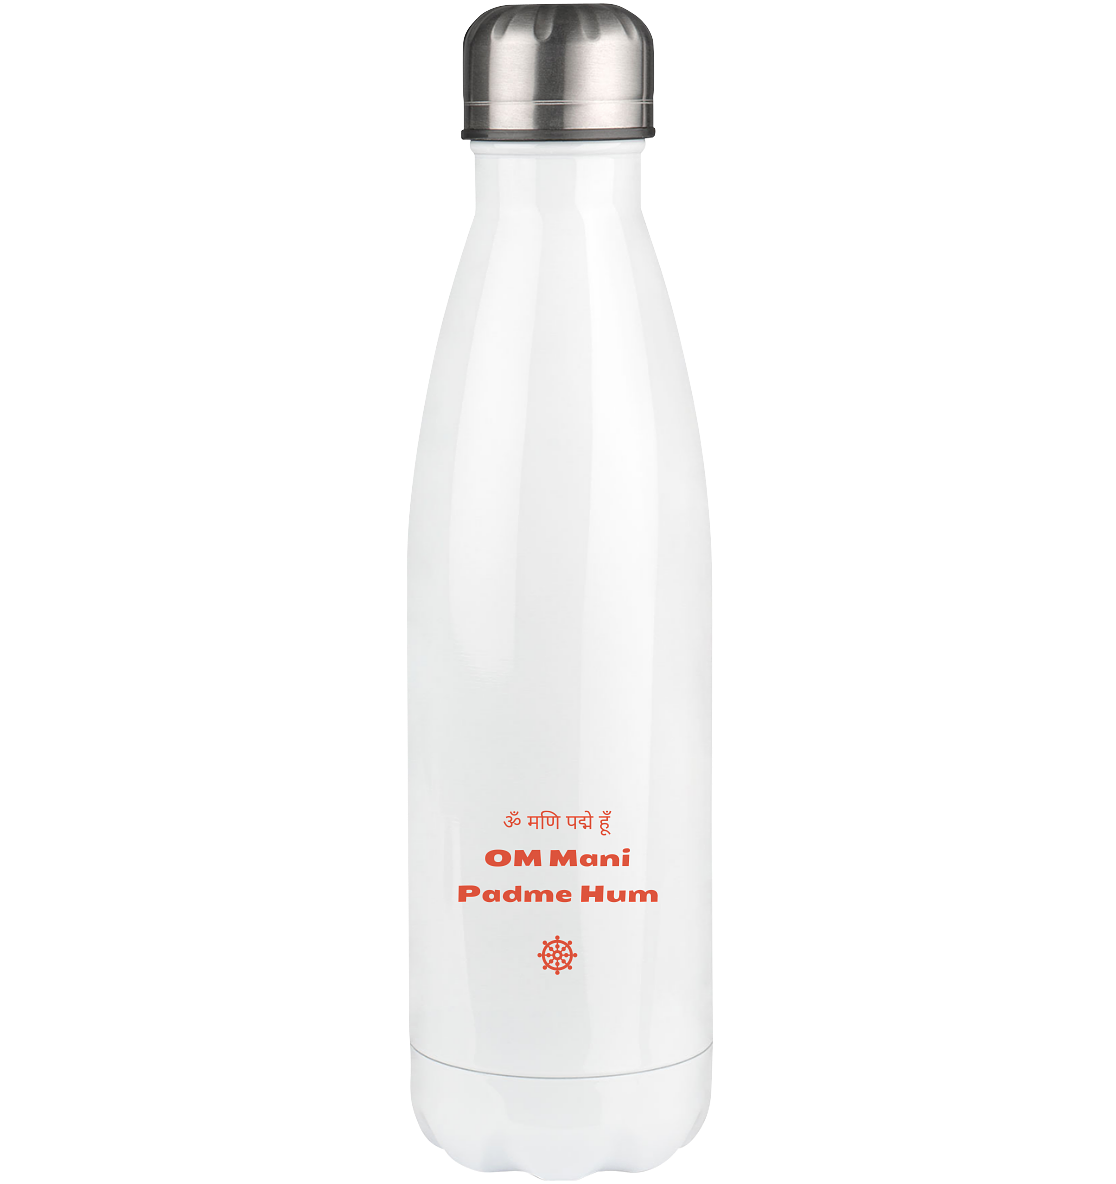 Om Mani Padme Hum Mantra | Thermoflasche 500ml